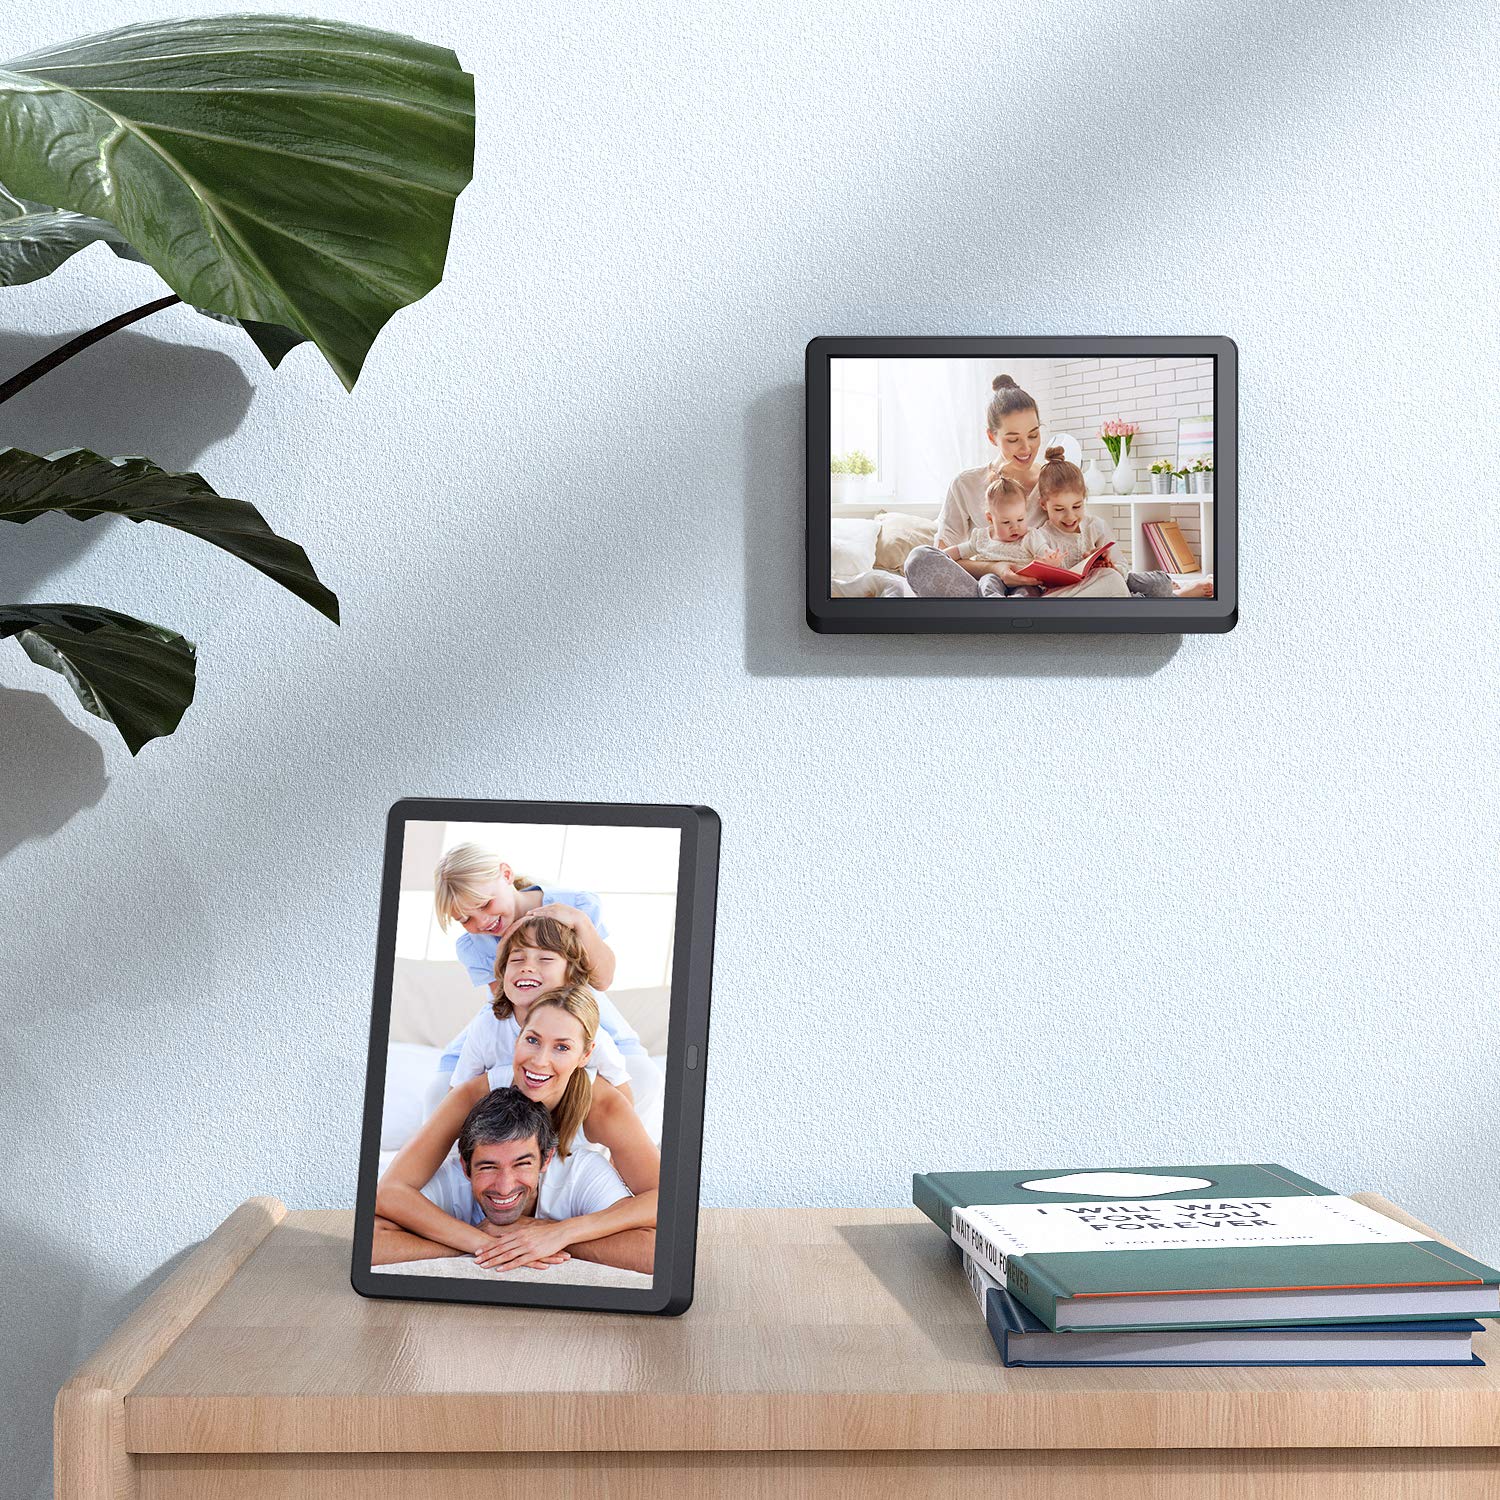 Digital Photo Frame 8 inch FHD, Fambrow Digital Picture Frame 1920x1080 Full IPS Display with Photo/Music/Video Player/Calendar/Alarm, Brightness Adjustable Electronic Photo Frame with Remote Control